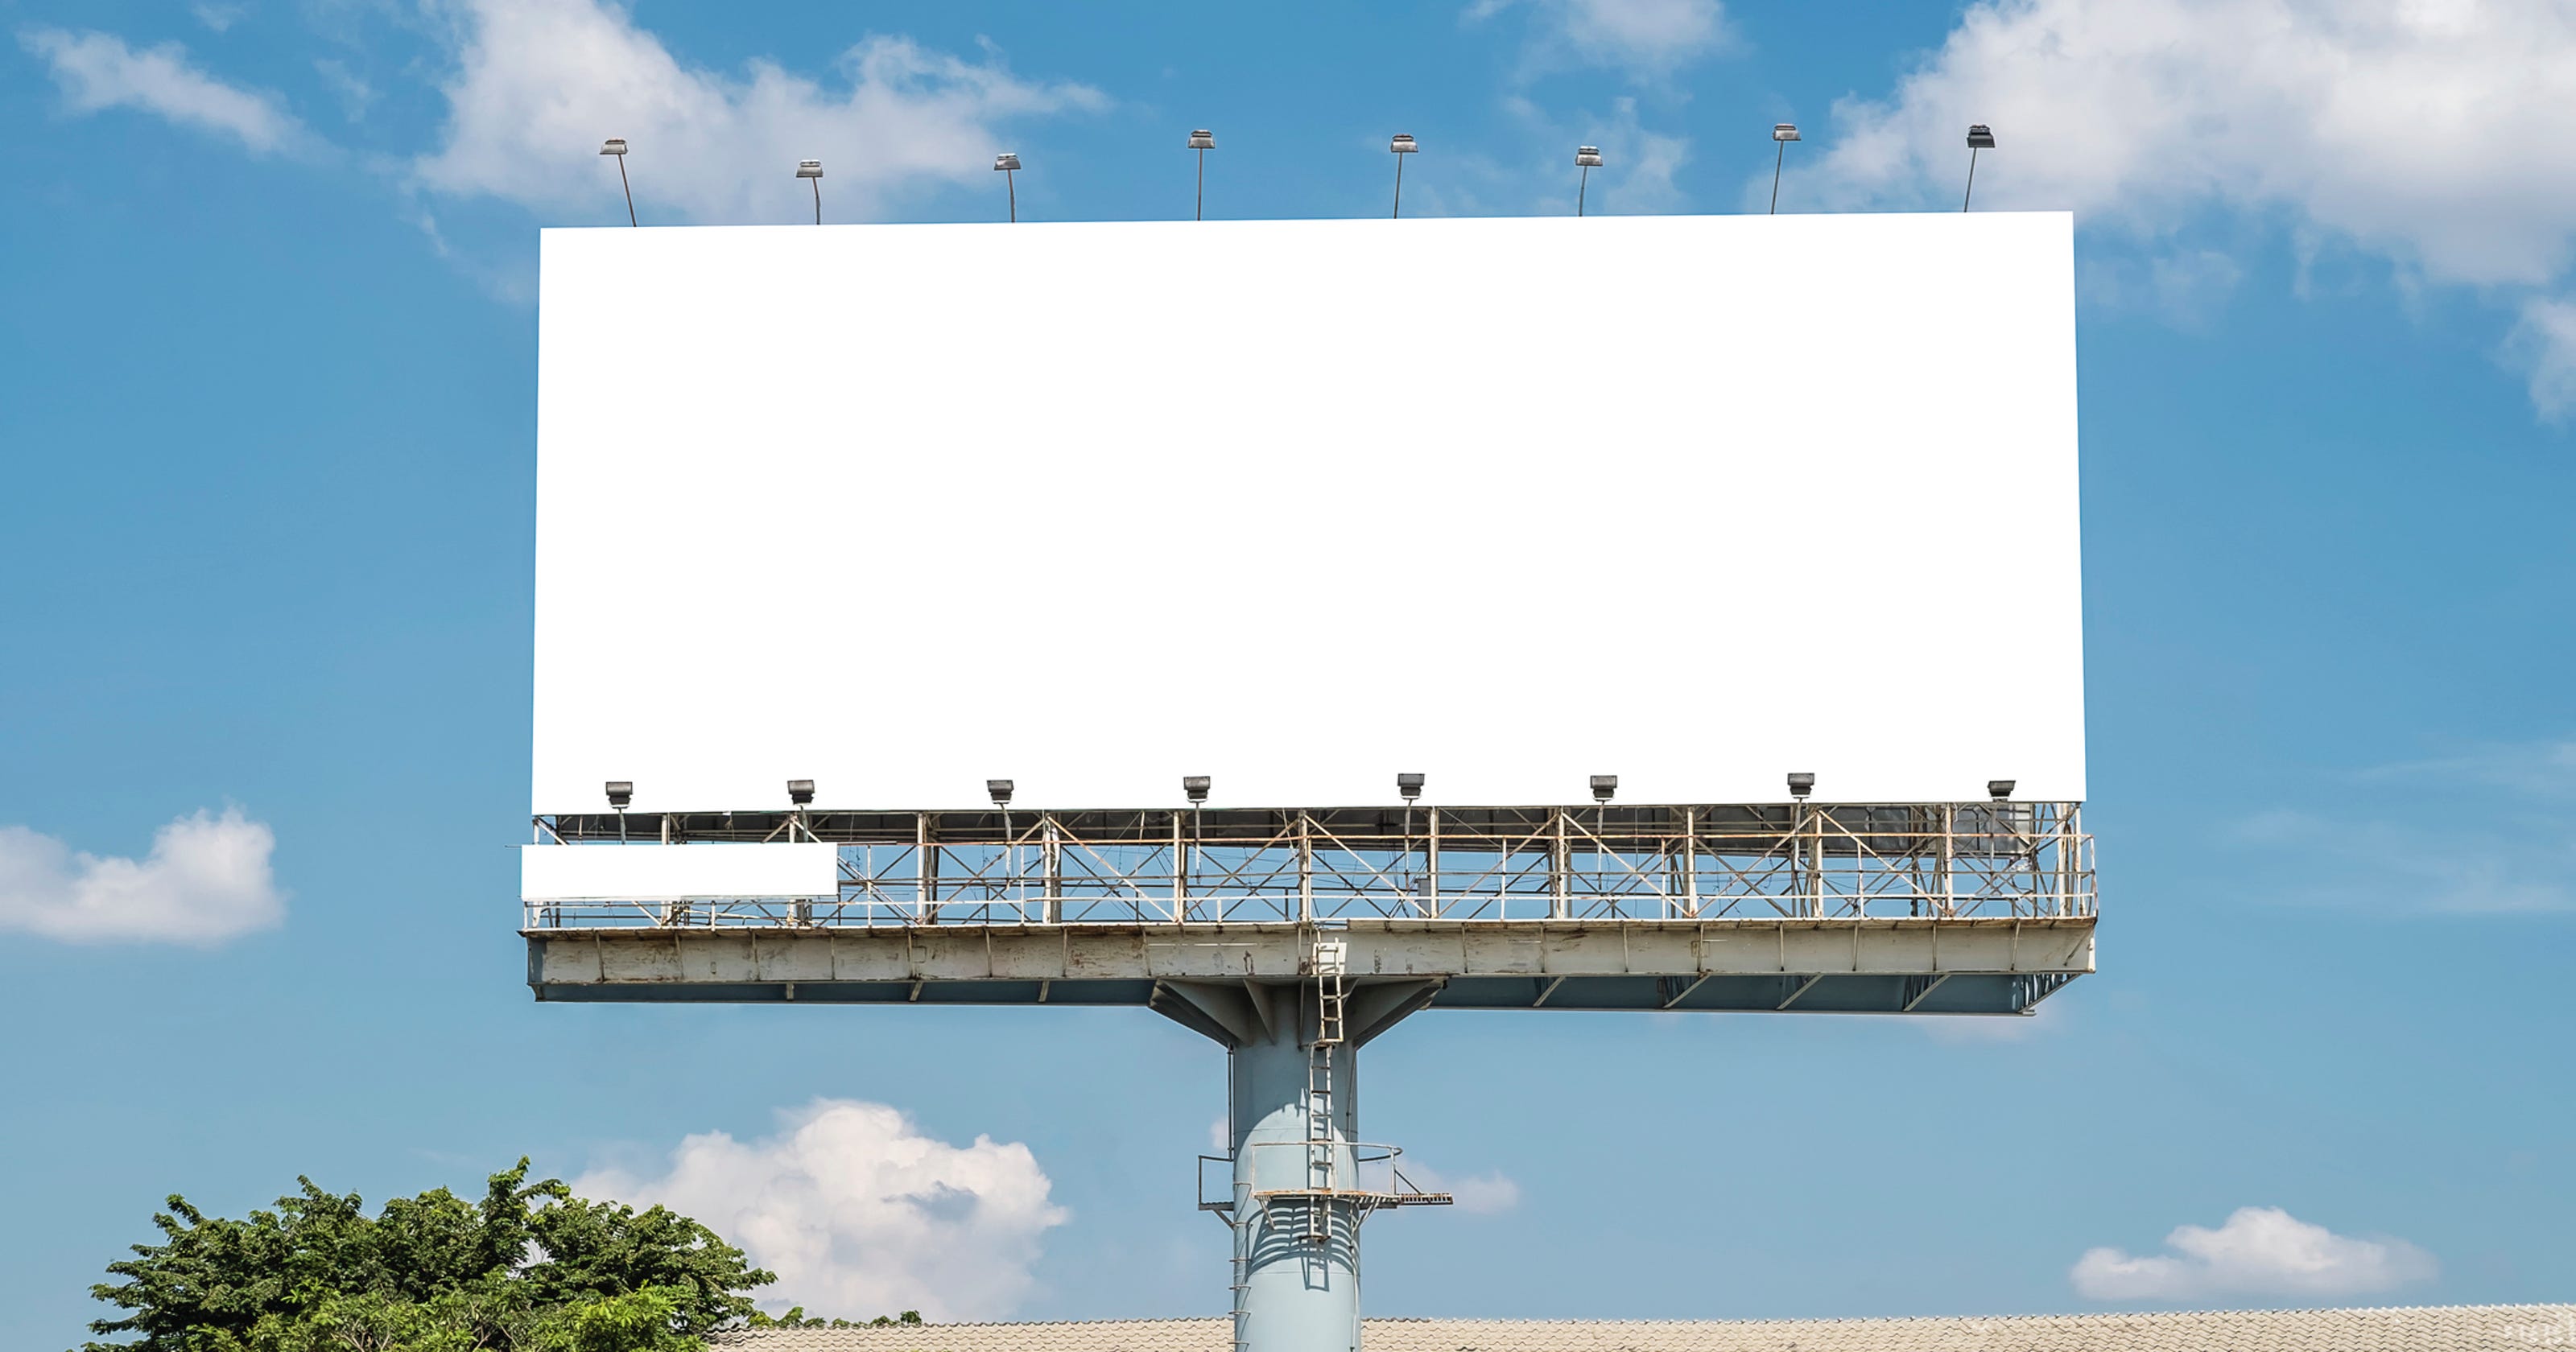 Porn plays on I-75 billboard, police searching for suspects ...